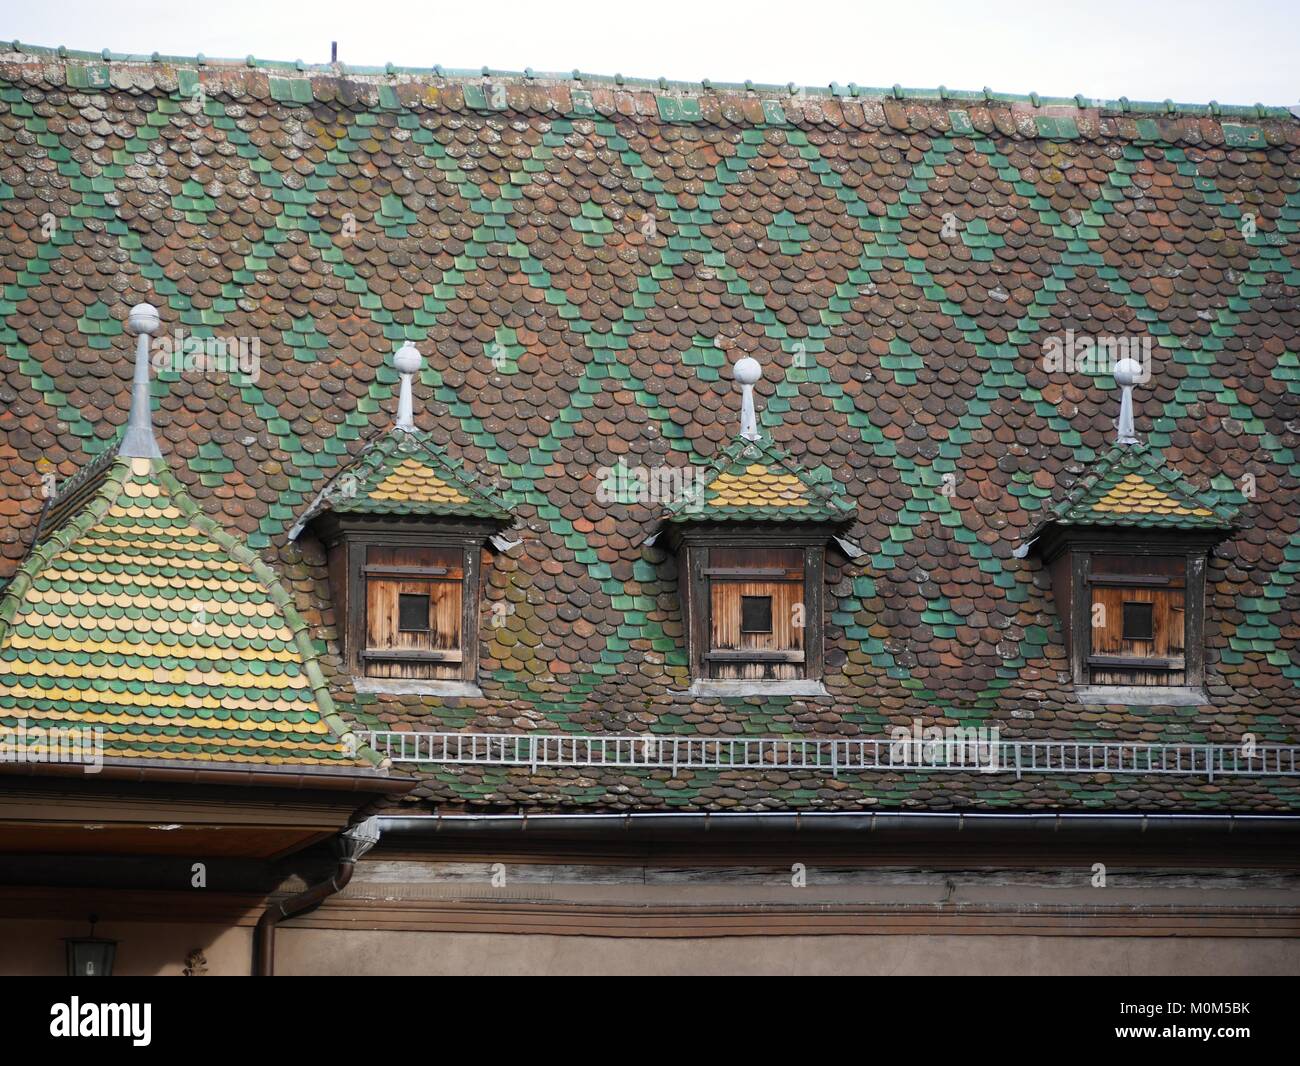 Colourful tiled roof of St Martin's Church, Colmar, Alsace, France Stock Photo